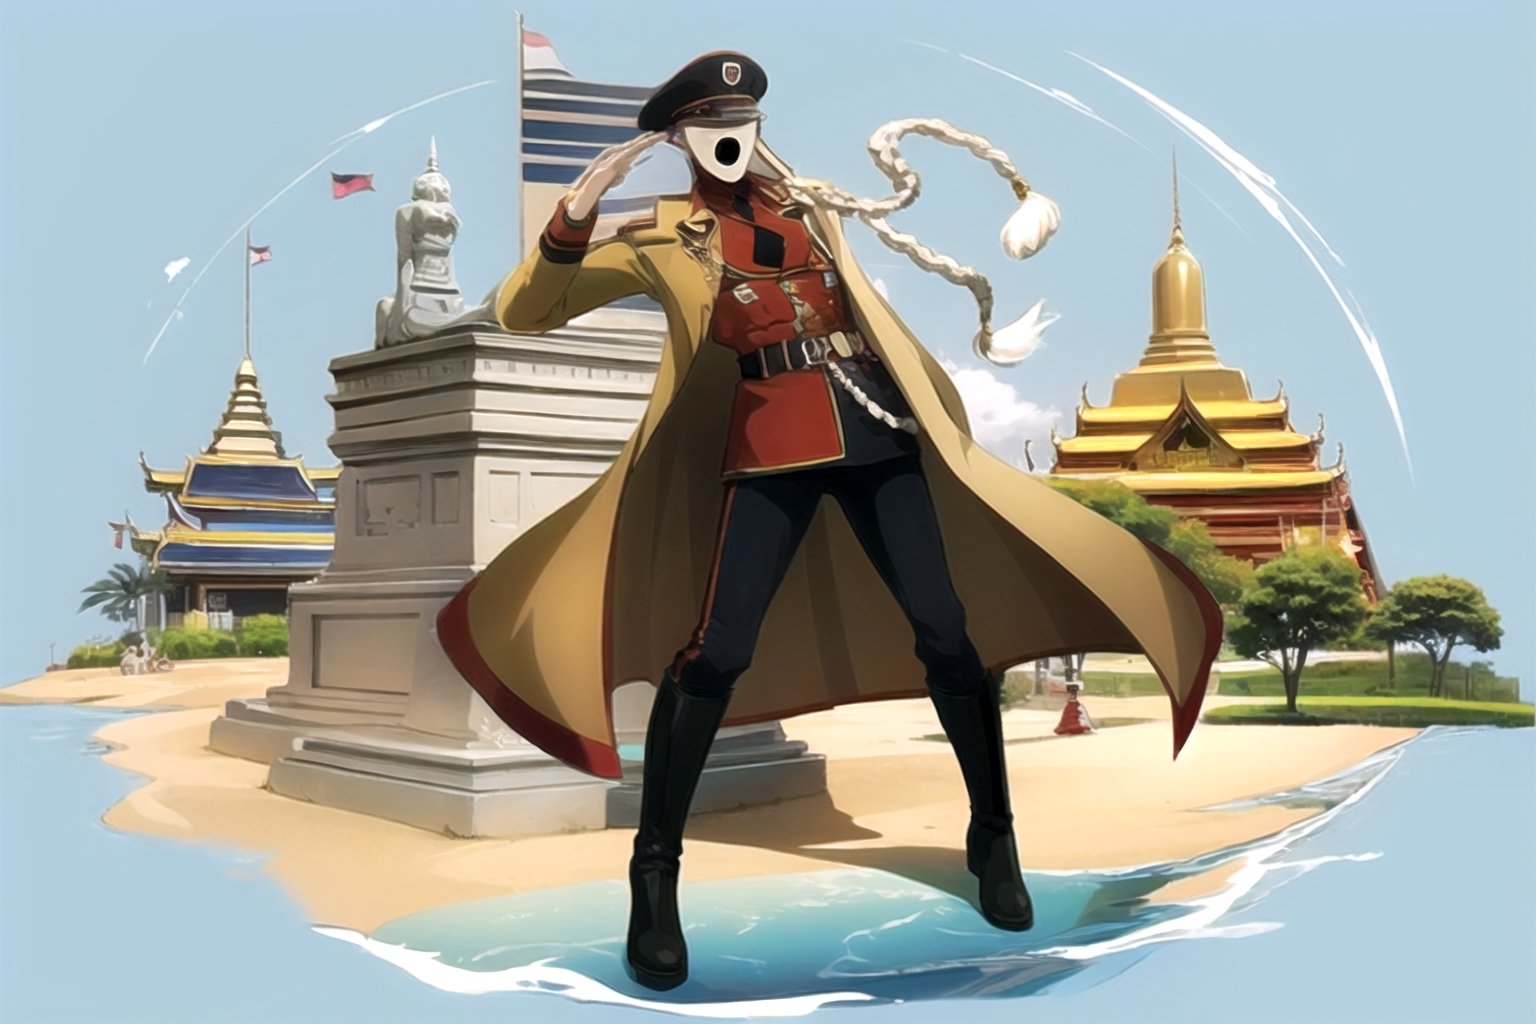 (masterpiece), (best quality), 8k illustration, , 
//Character,
, 1male, solo, ,Neutral mask, face man, four fingers, dark eyes, hat, trench coat, colorful german soldier uniform, colorful necktie, black boots, pandora's actor, open mouth, black mouth, wearing black sunglass
//Fashion,
//Background,
s,, , ,Pandora's Actor, salute pose,Songkran Festival,

Songkran day, water splash, water festival, water gun, sand castle, water bucket, golden pagoda, golden temple, festival flags, effect of flowing water, colorful style, Thailand decoration, colorful swimming glasses,masterpiece,best quality